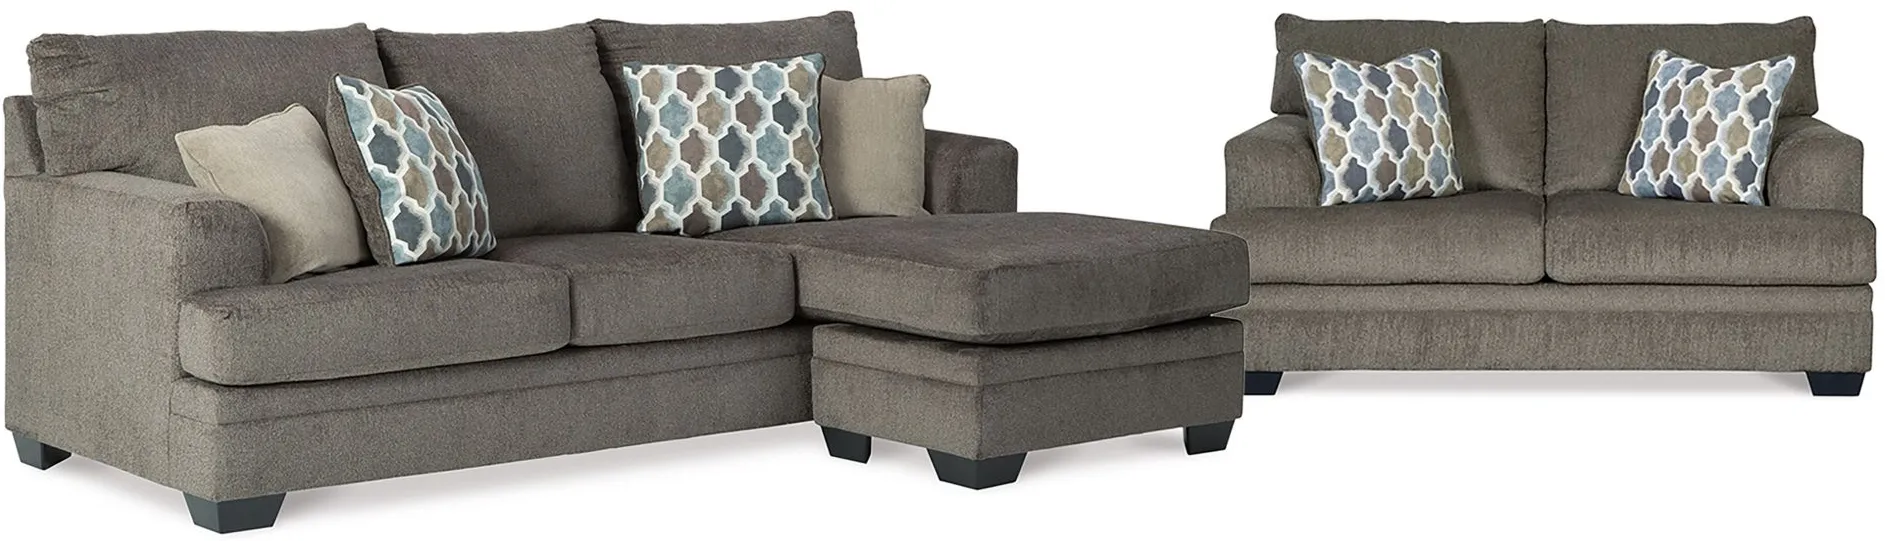 Dorsten 2-pc. Sofa Chaise and Loveseat Set in Slate by Ashley Furniture